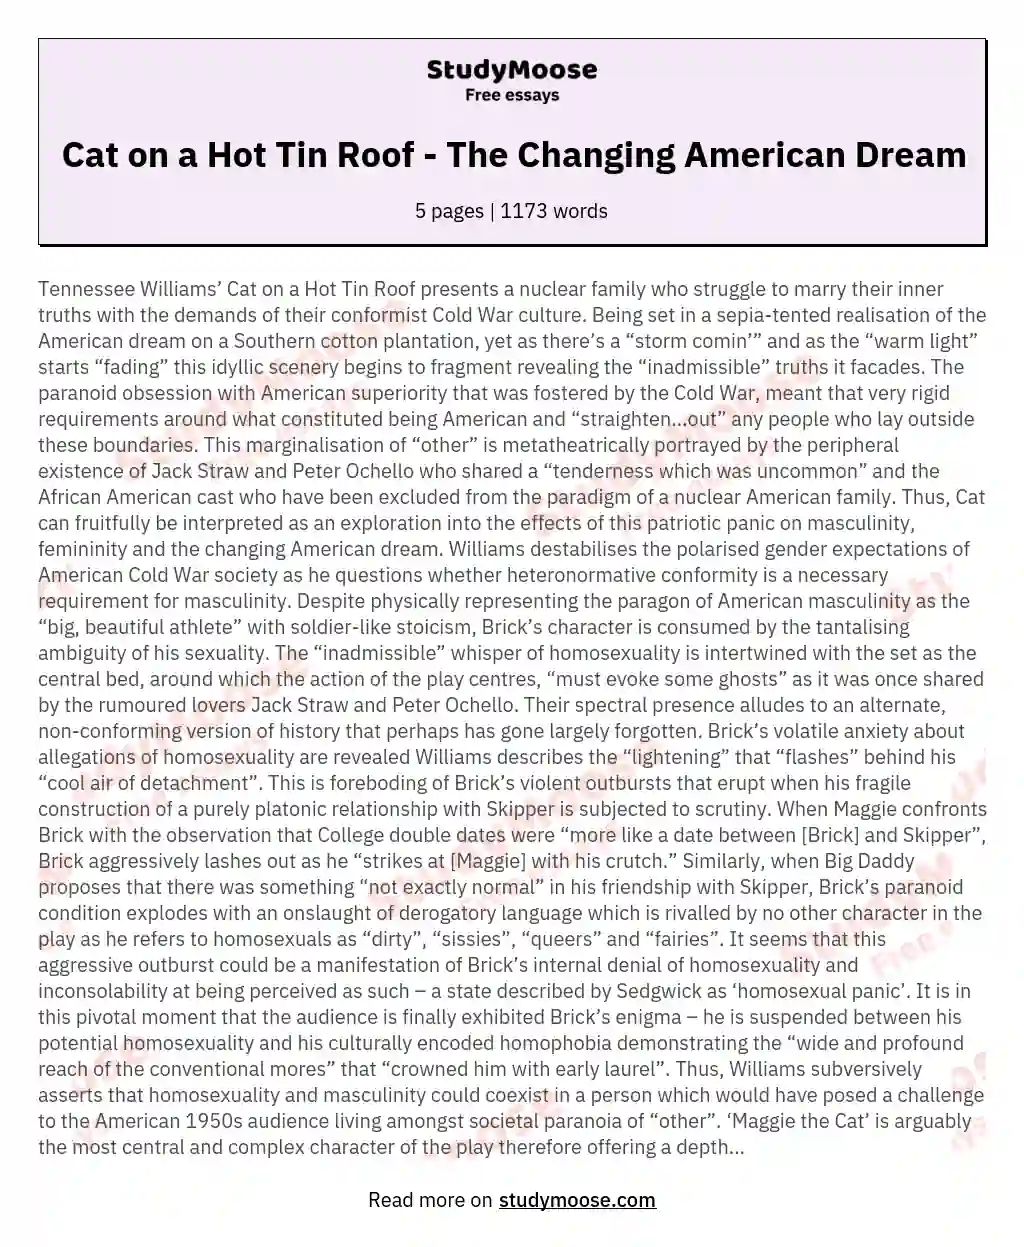 Cat on a Hot Tin Roof - The Changing American Dream essay